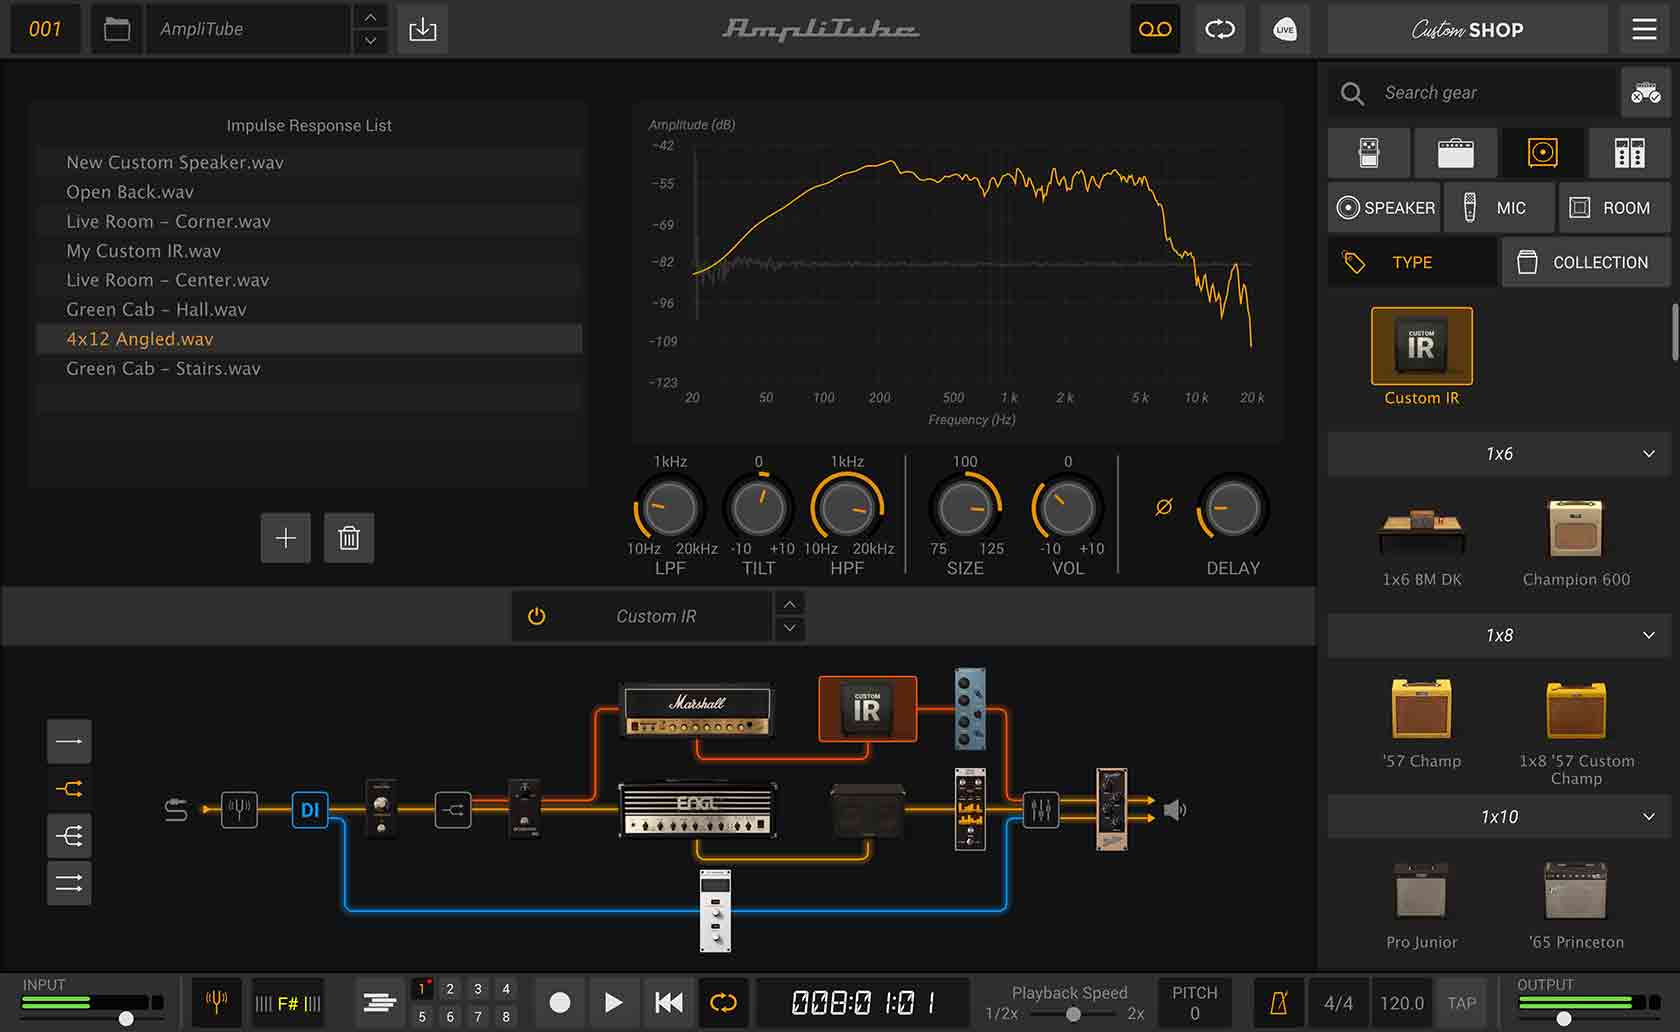 download the new version for ios AmpliTube 5.6.0